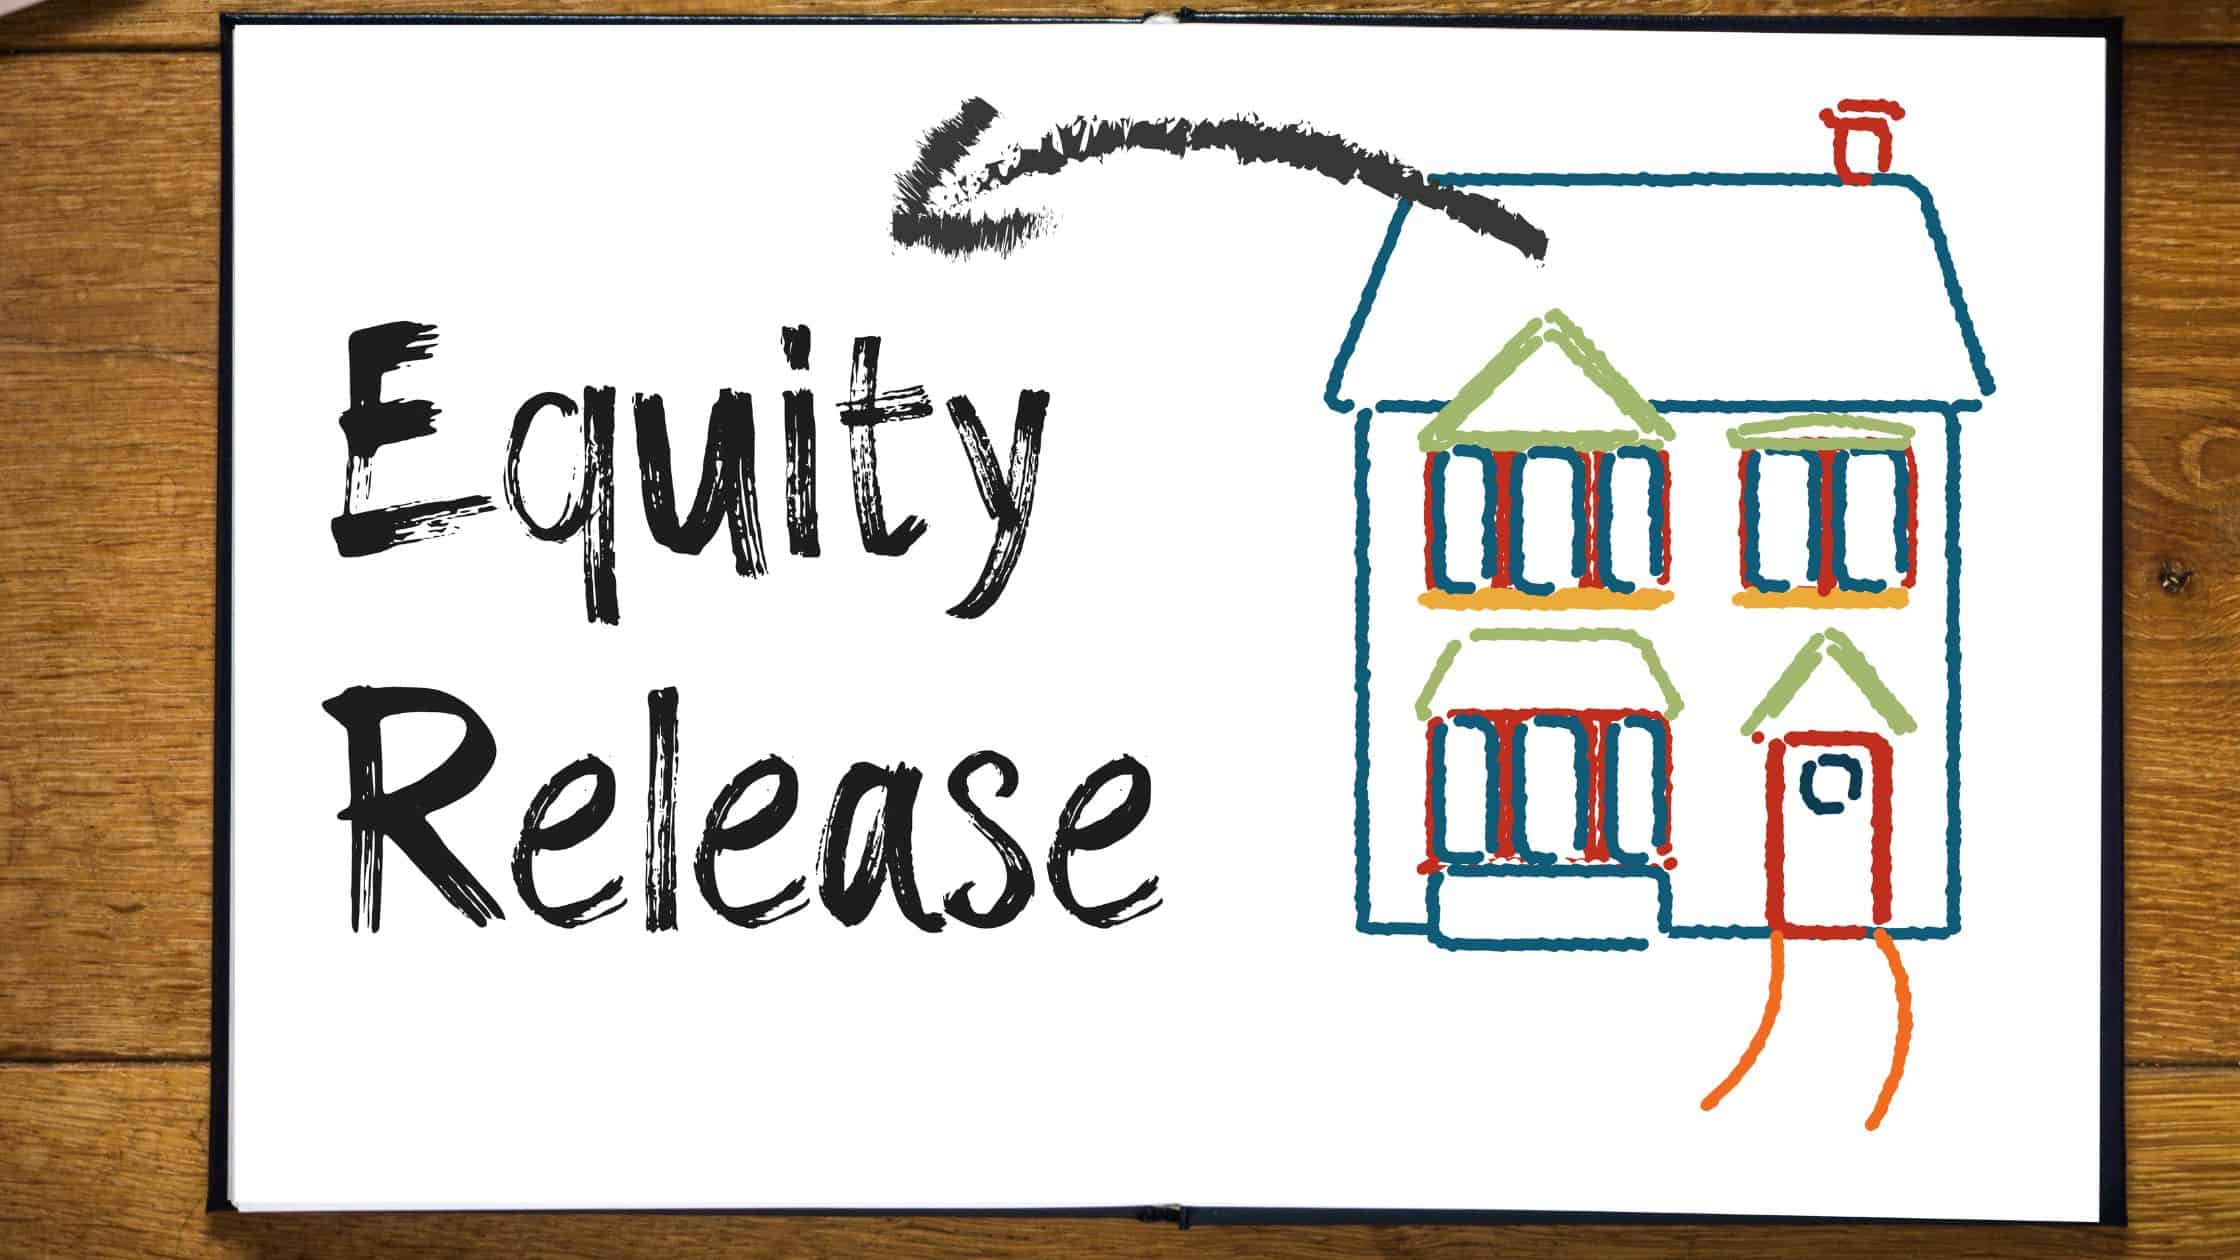 equity release